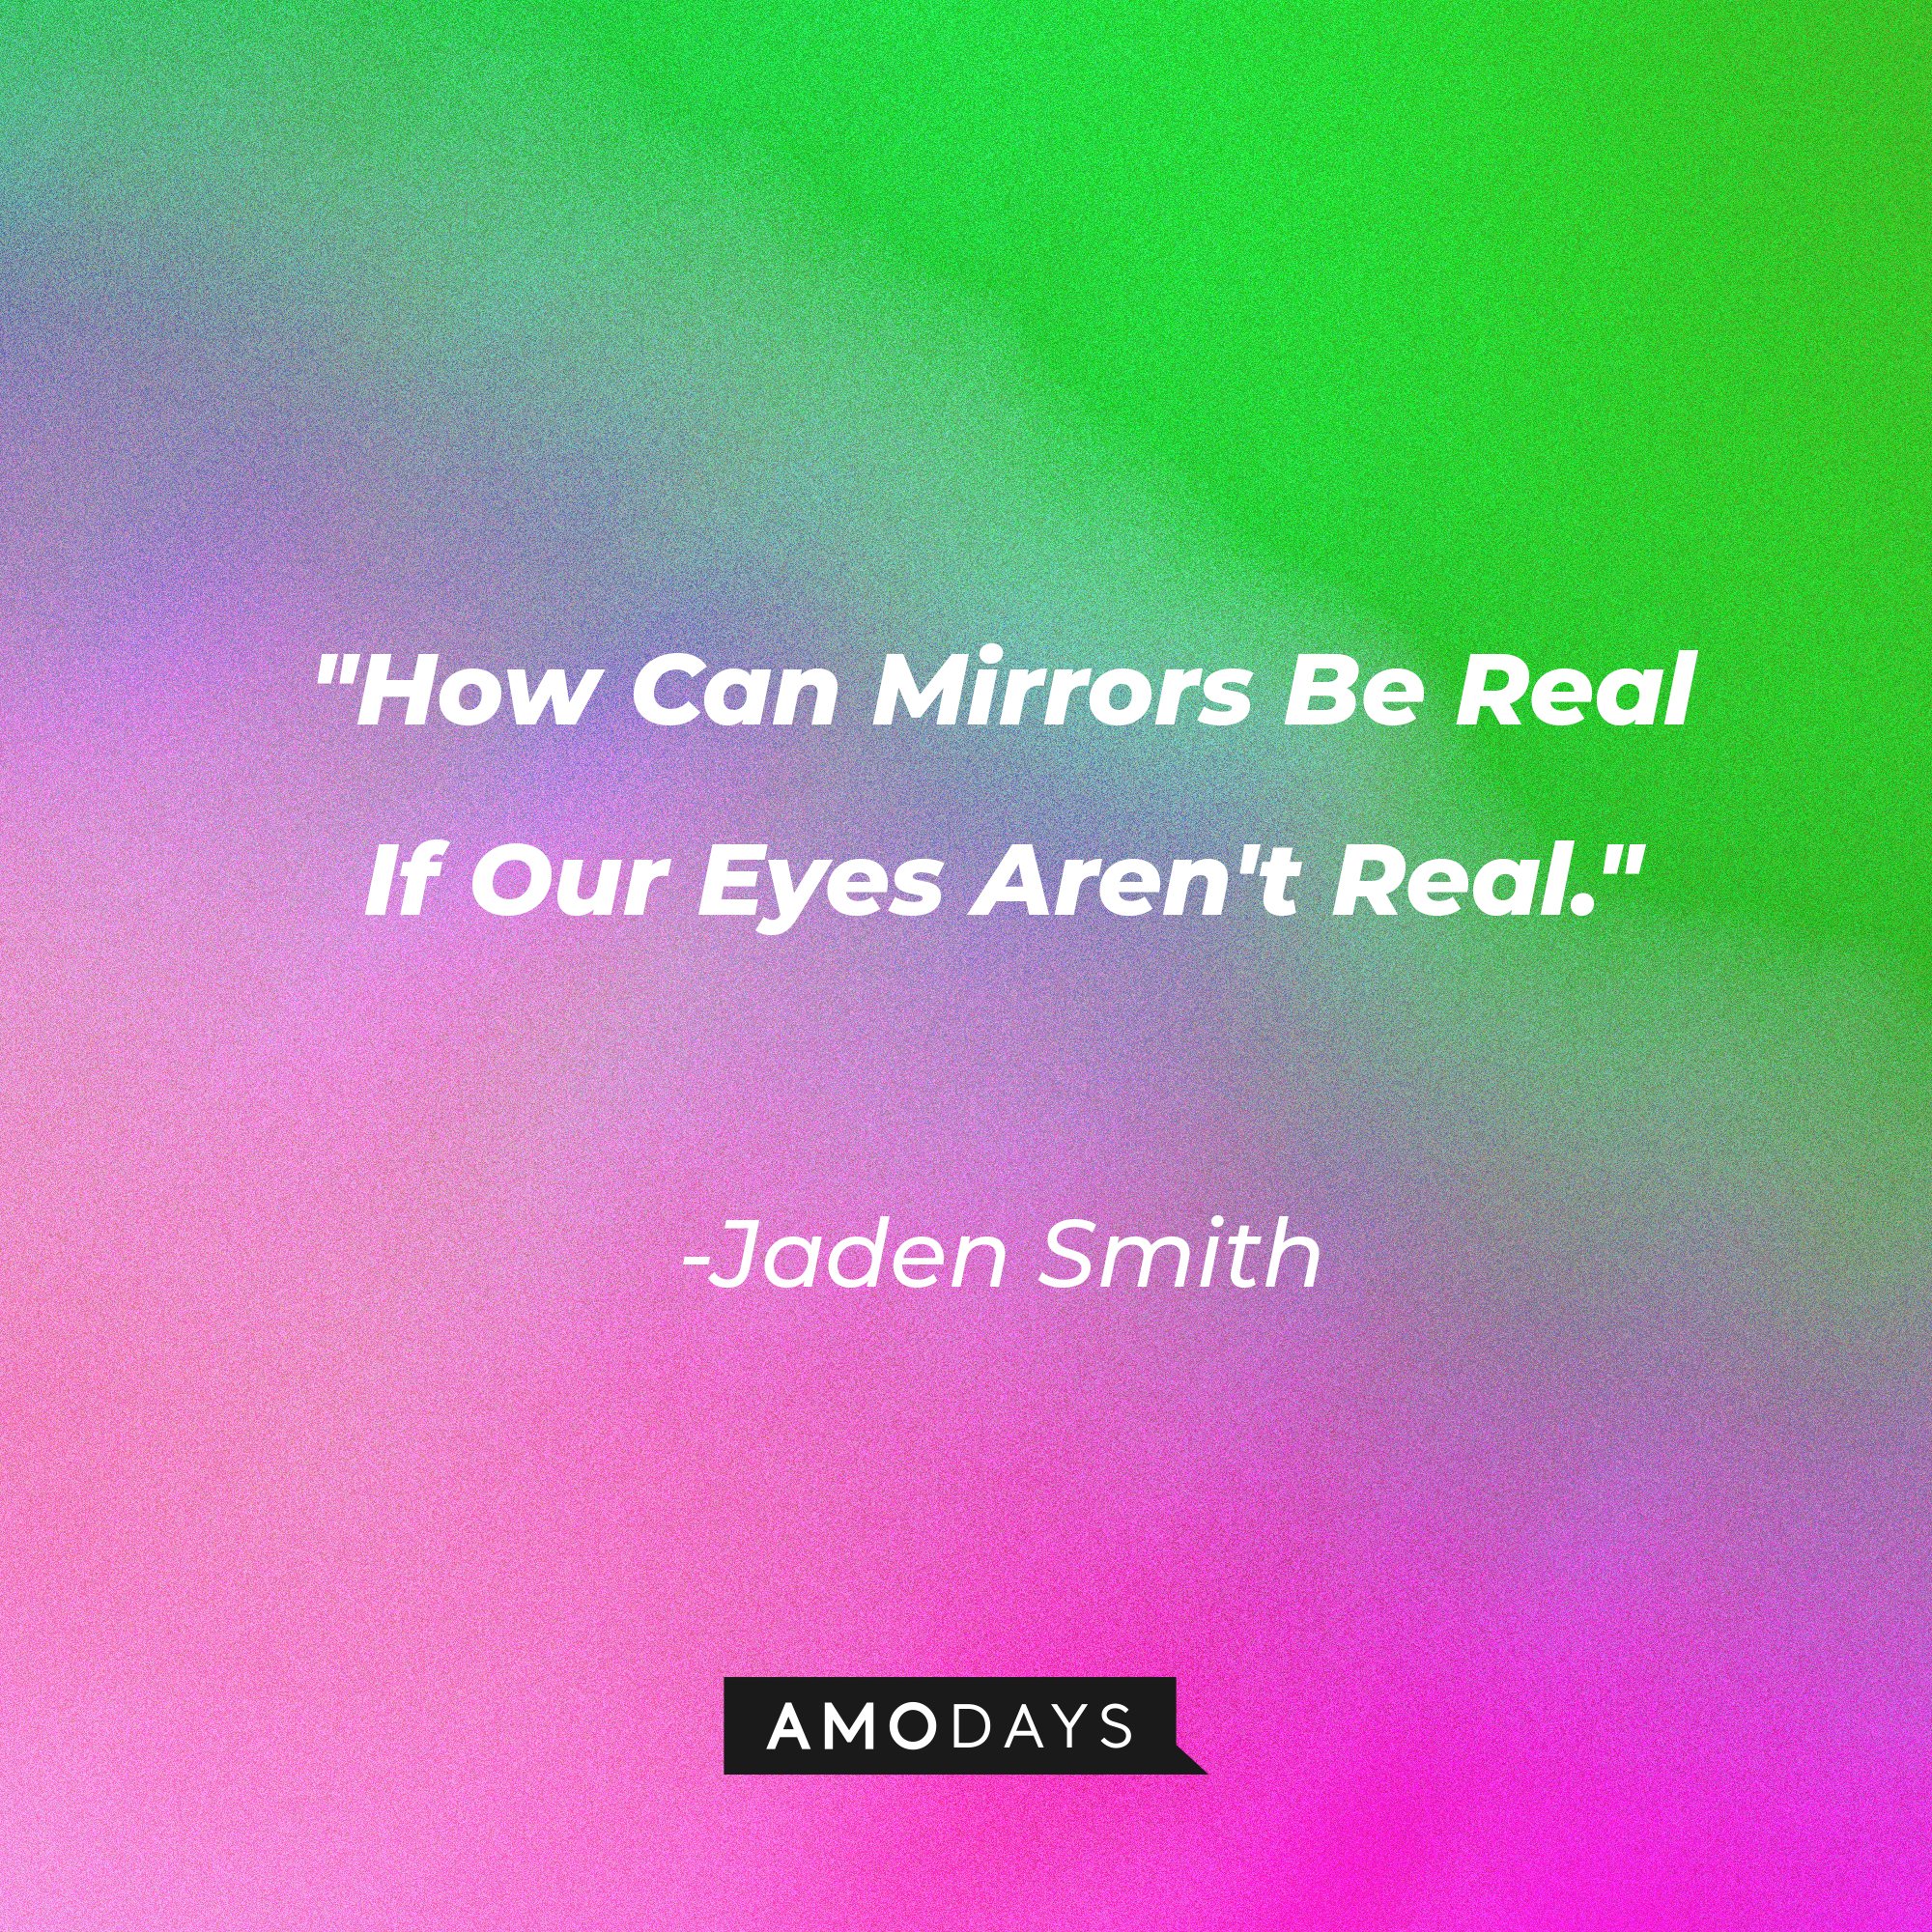 Jaden Smith's quote: "How Can Mirrors Be Real If Our Eyes Aren't Real." | Image: AmoDays